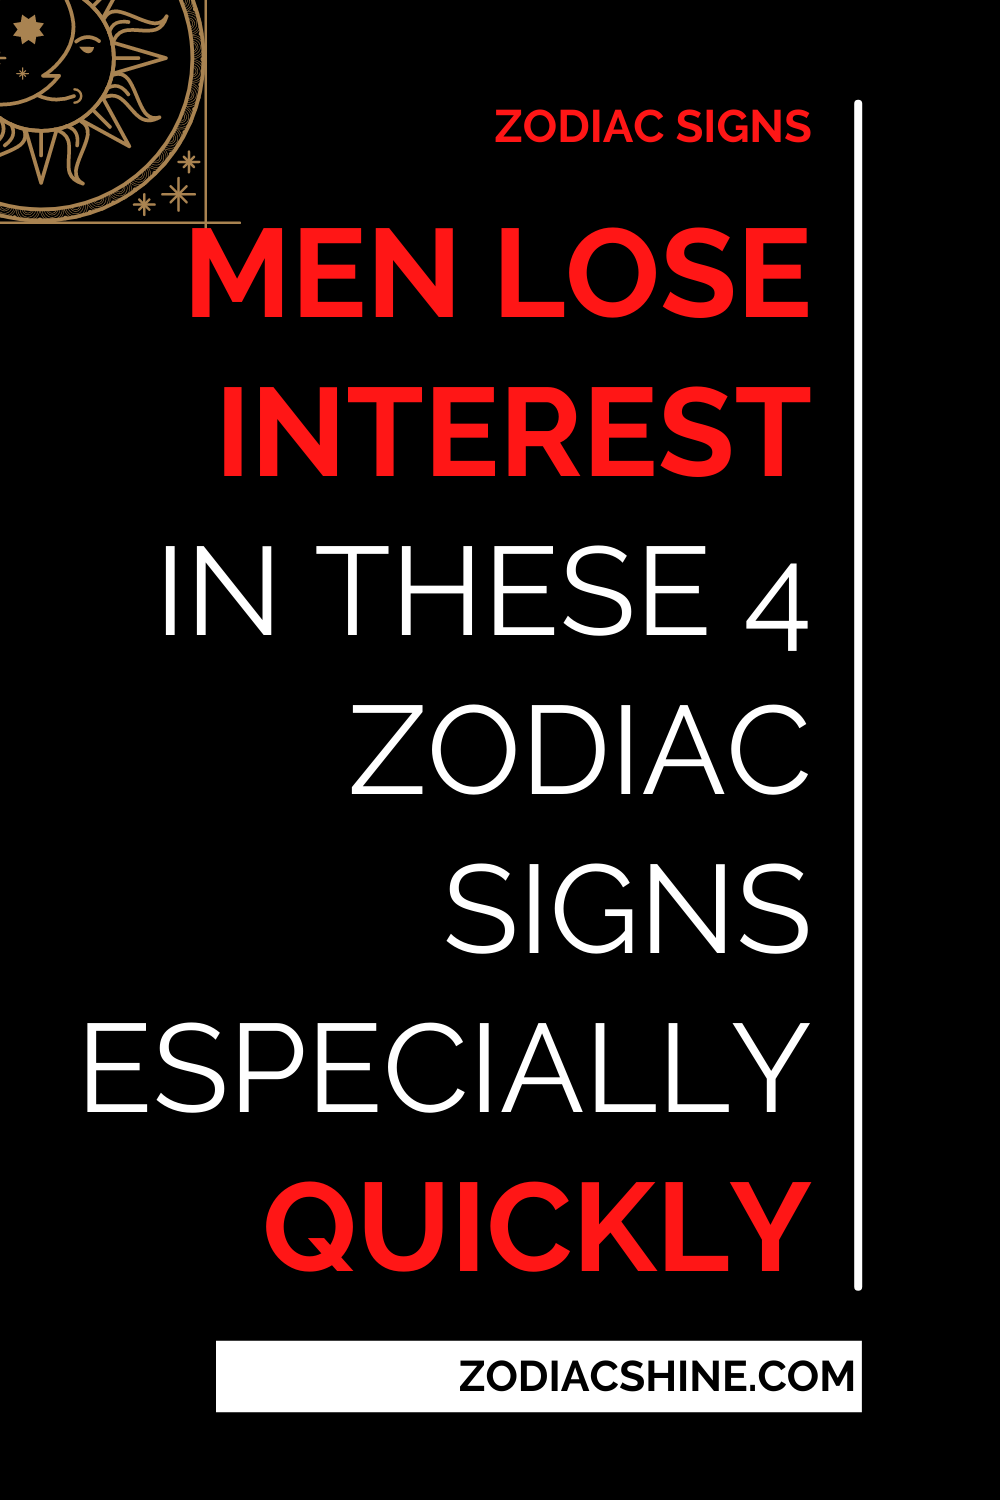 Men Lose Interest In These 4 Zodiac Signs Especially Quickly